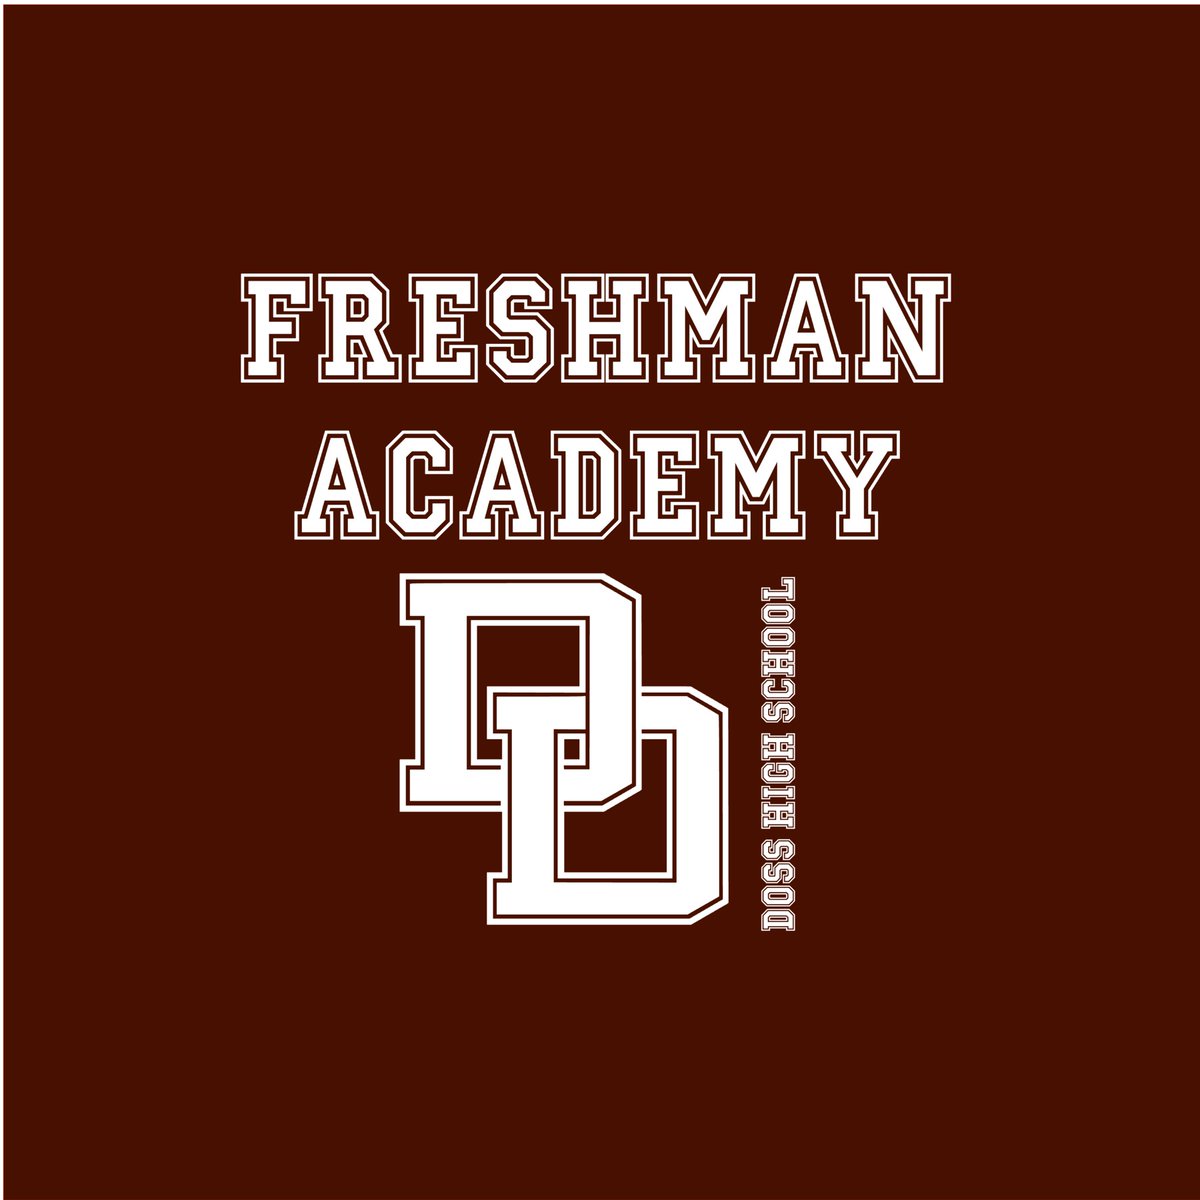 Freshman Awards & Academy Reveal Ceremony will be held on Thursday, May 2nd at 10:30 am in the Leon Mudd Gymnasium at Doss High School. NOTE: If you plan to attend, be aware of the Evolv Weapons Detection System all visitors must pass through & add extra time!